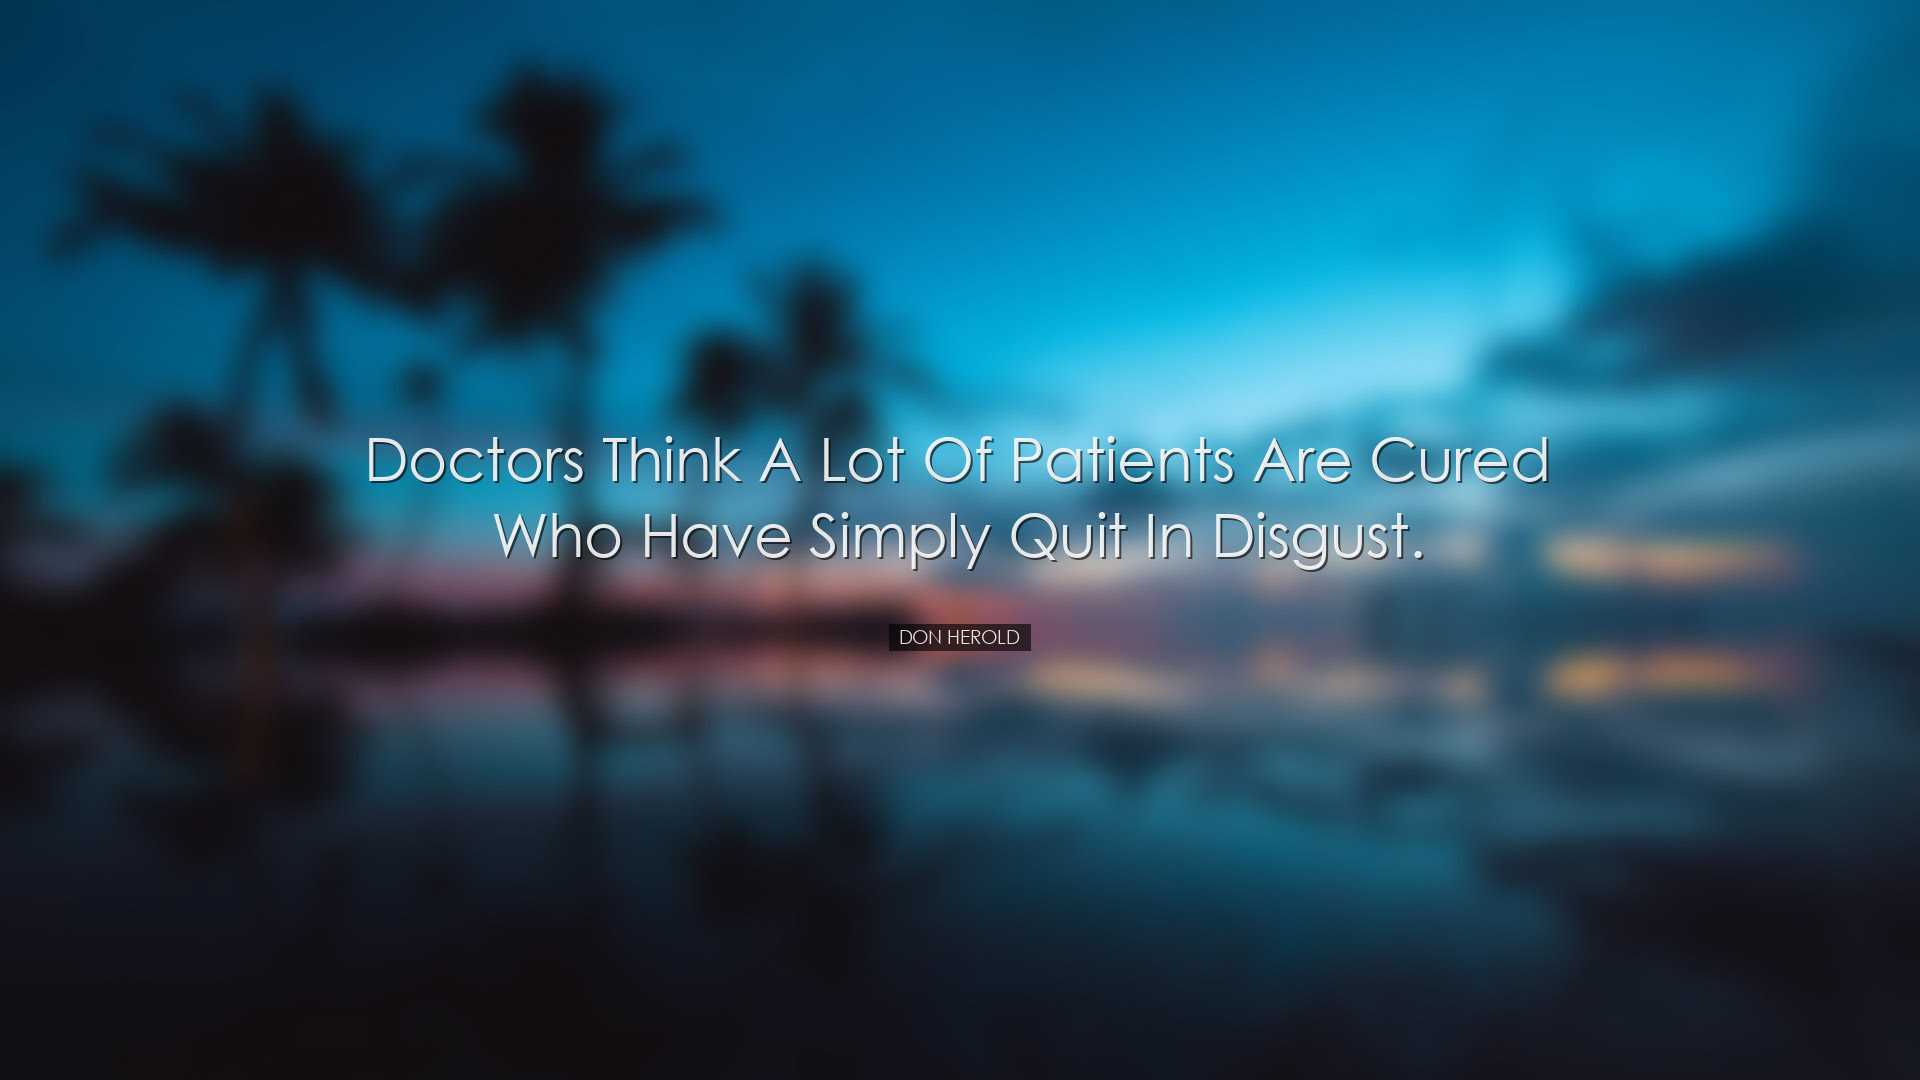 Doctors think a lot of patients are cured who have simply quit in